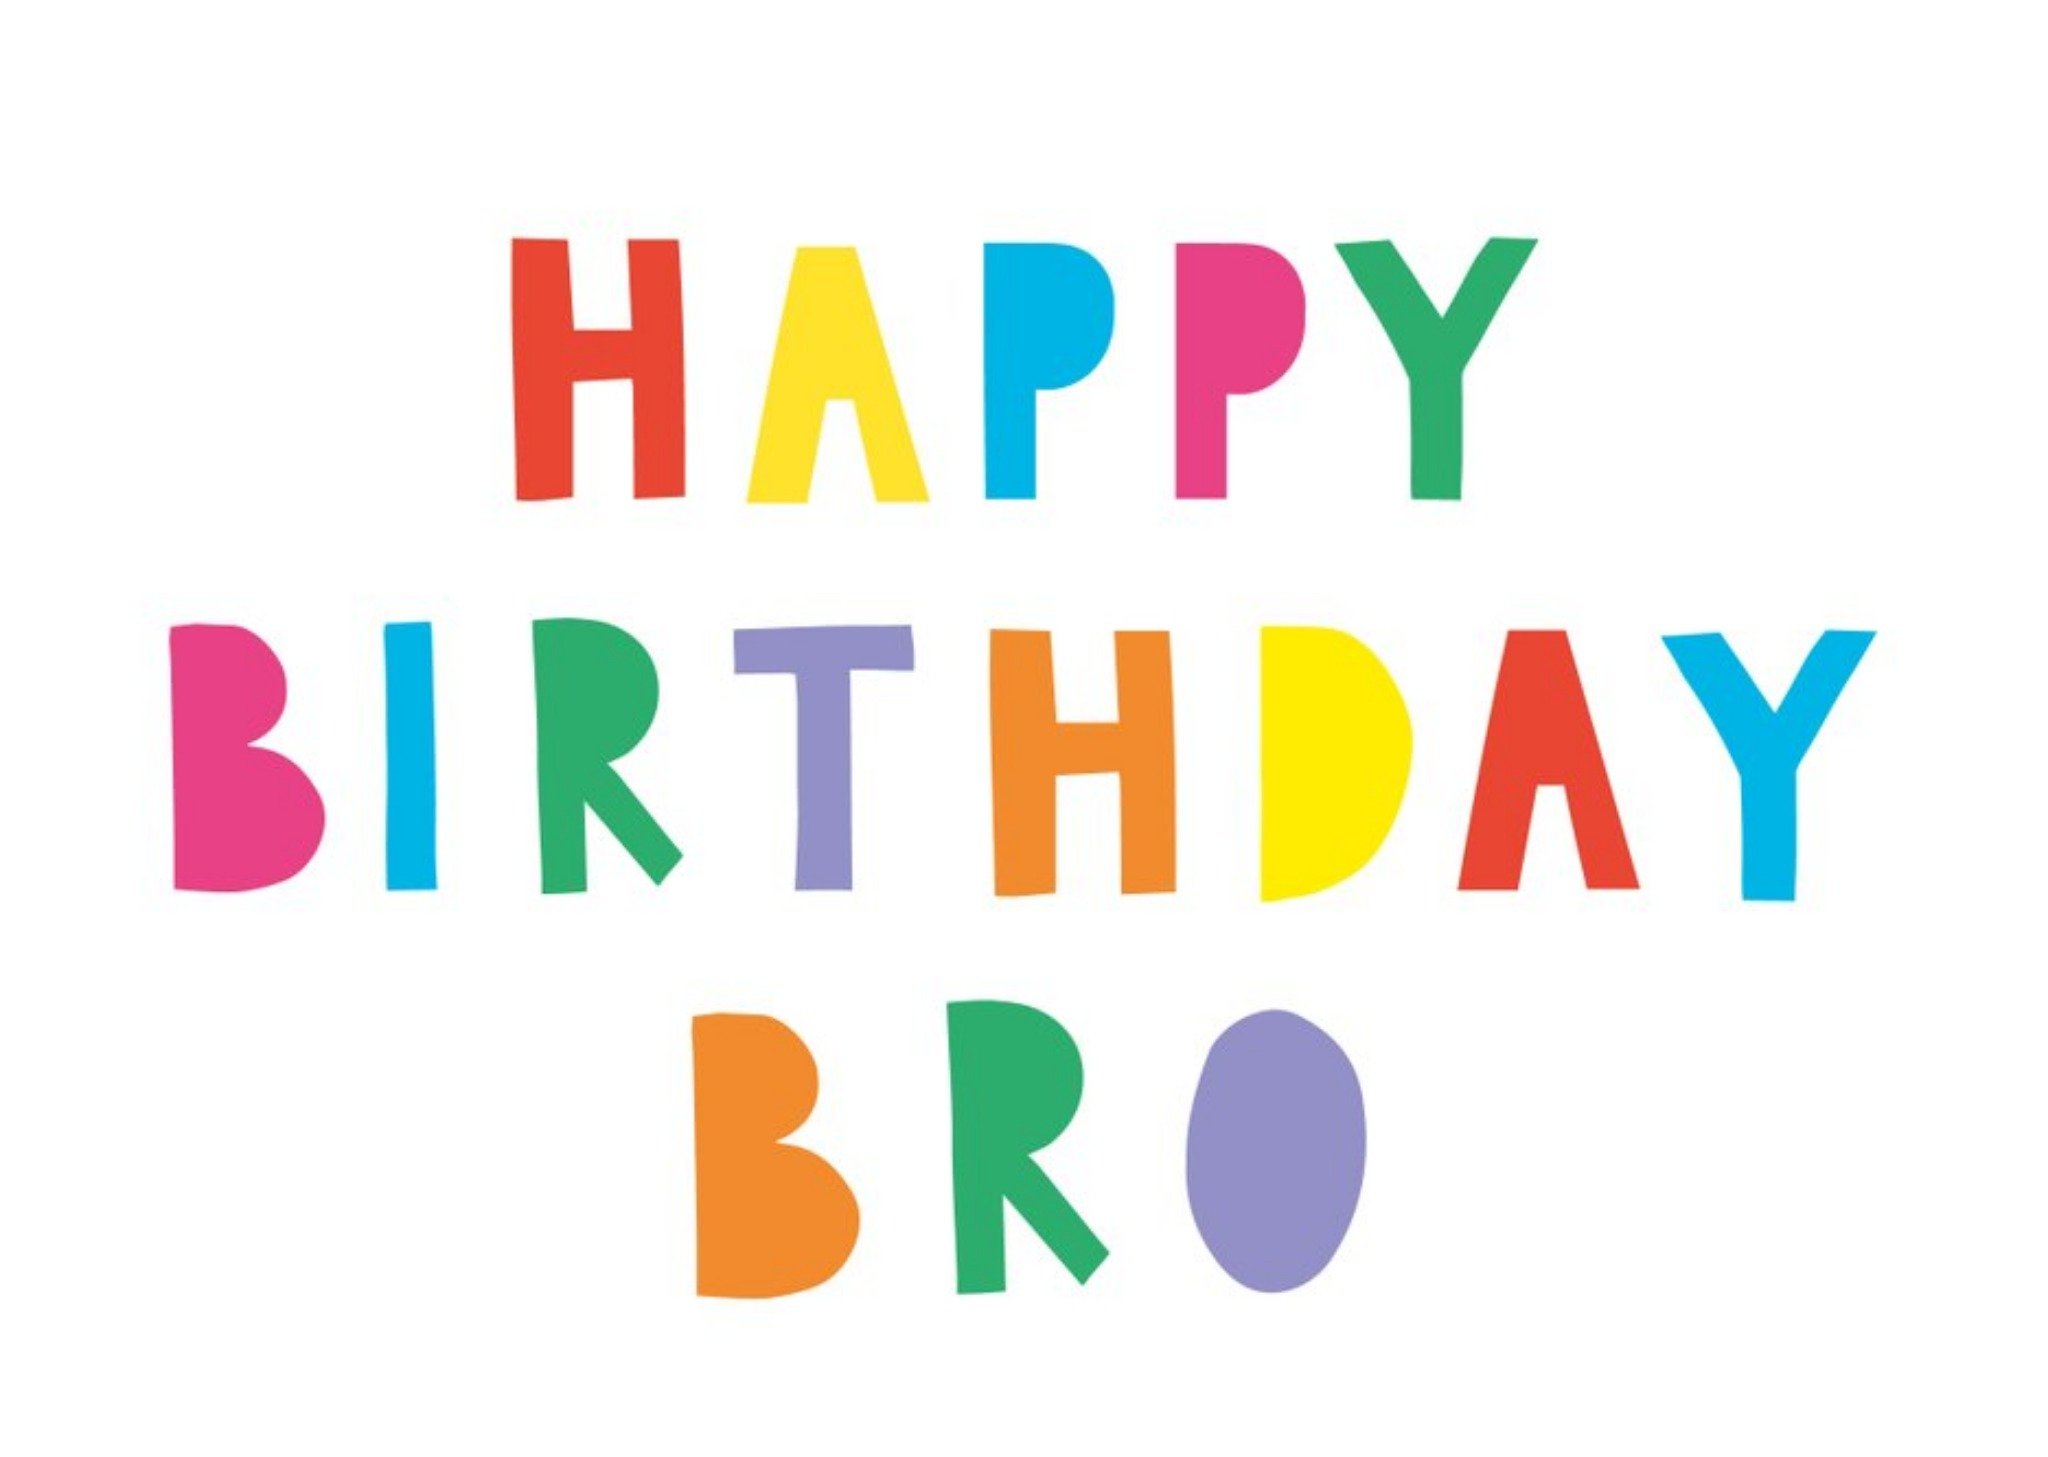 Moonpig Colourful Typography On A White Background Brother's Birthday Card Ecard